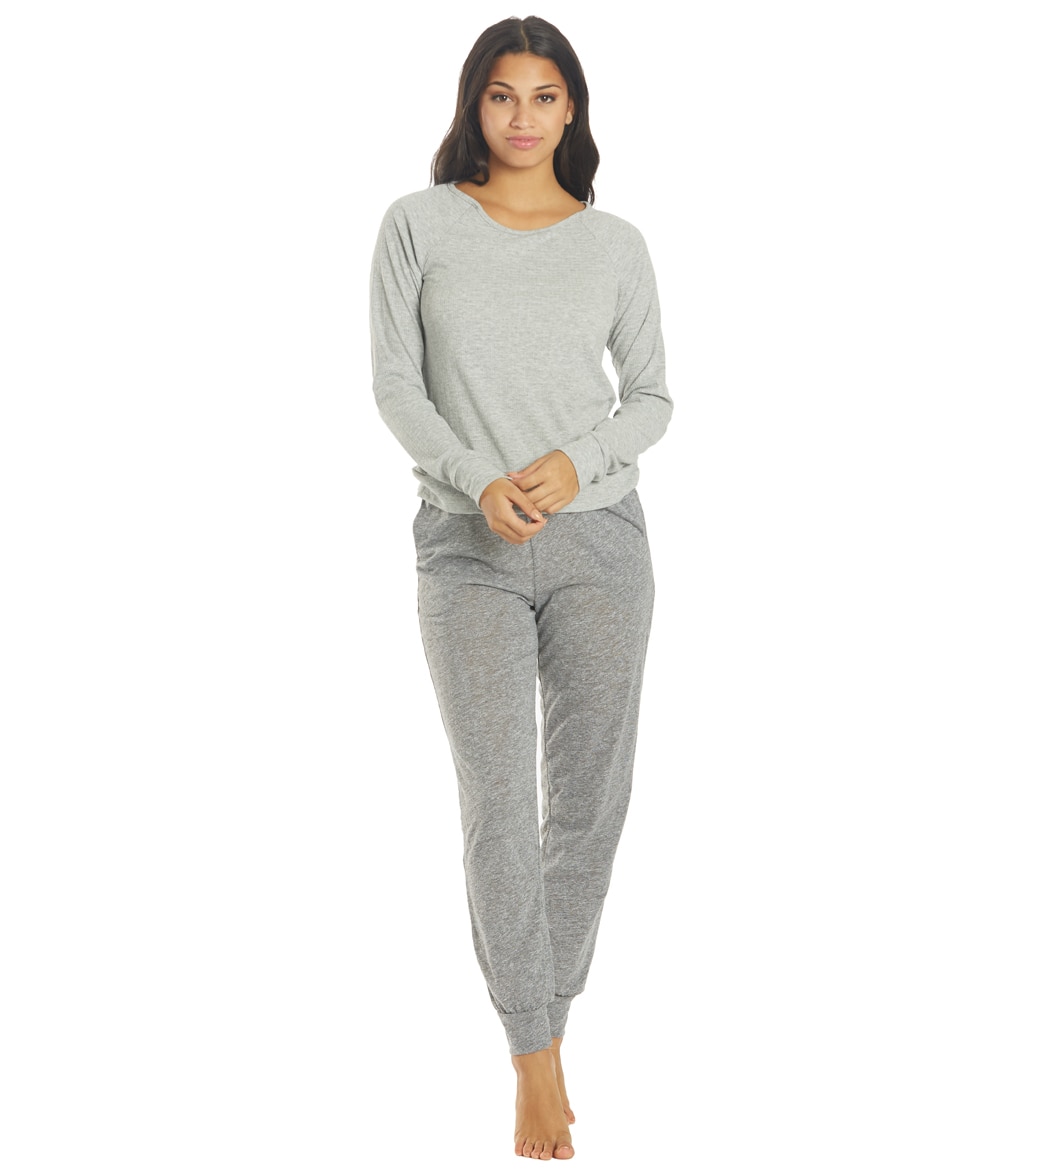 Nytt Striped Loungewear Set - Grey Pointelle Small Size Small - Swimoutlet.com